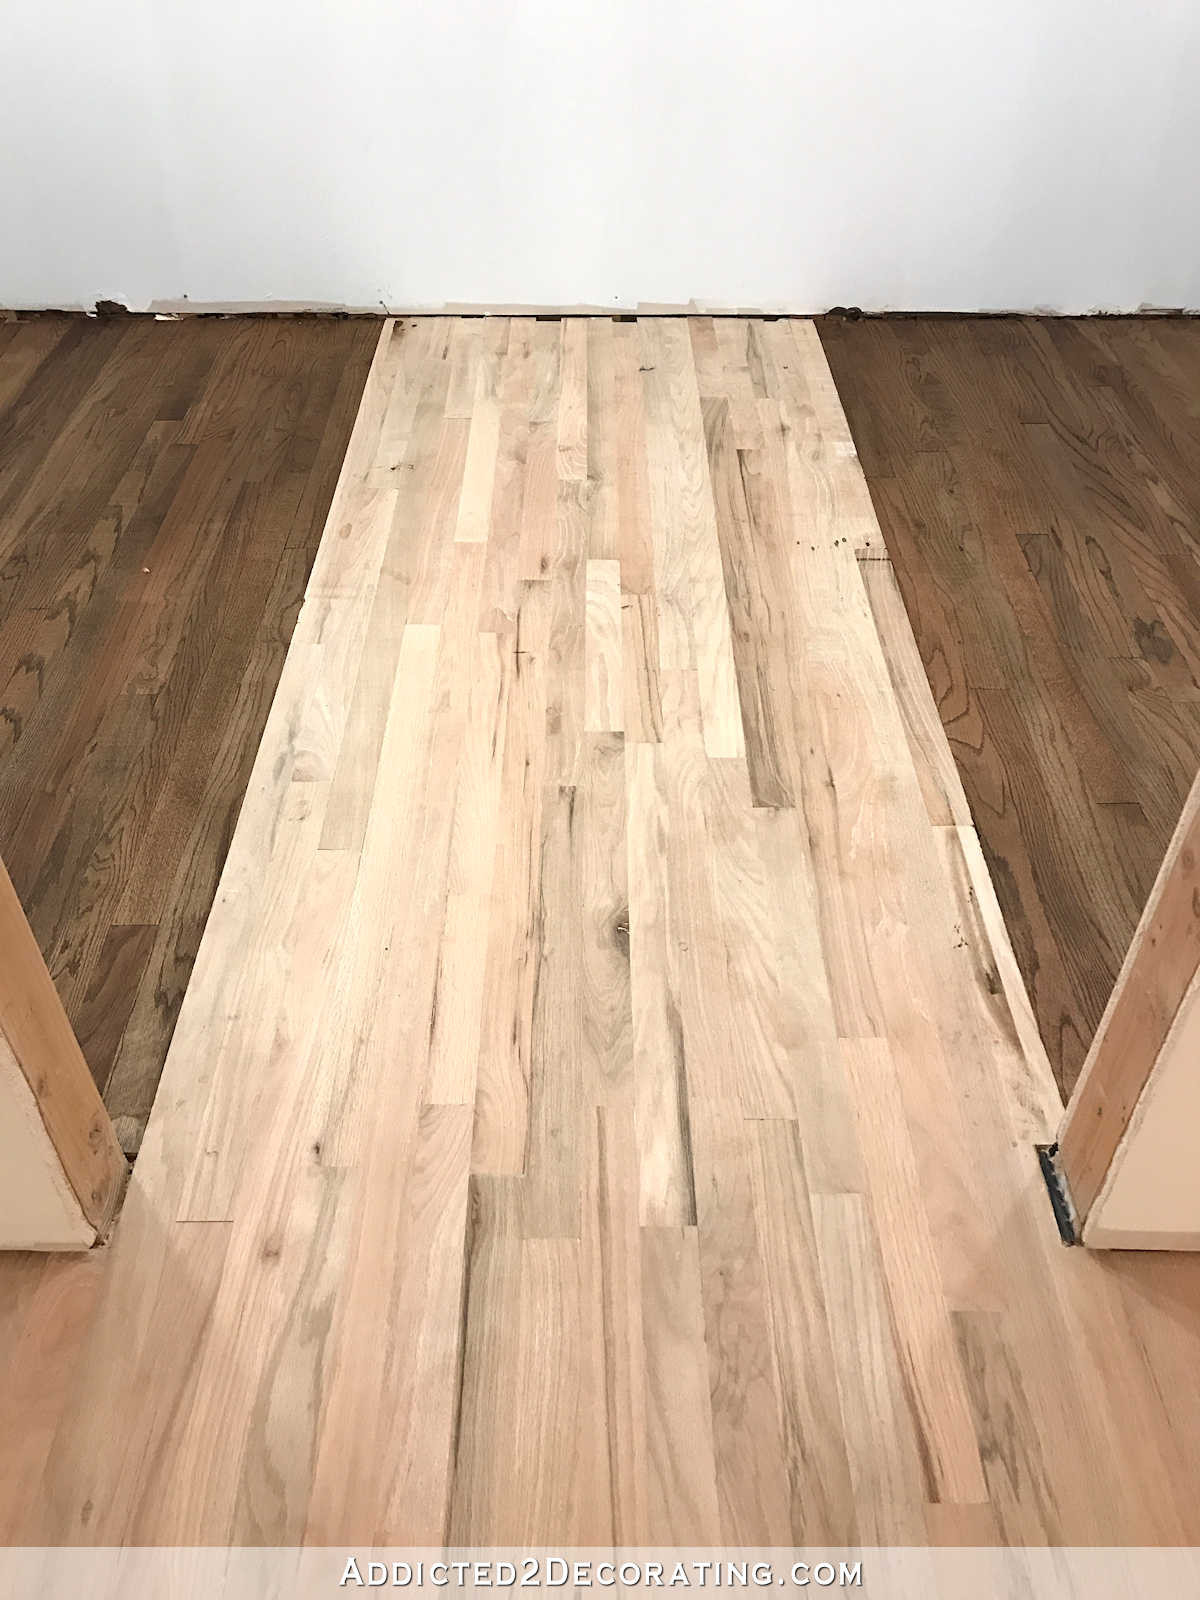 white oak hardwood floor colors of adventures in staining my red oak hardwood floors products process for staining red oak hardwood floors 11 stain on left and right sides of the